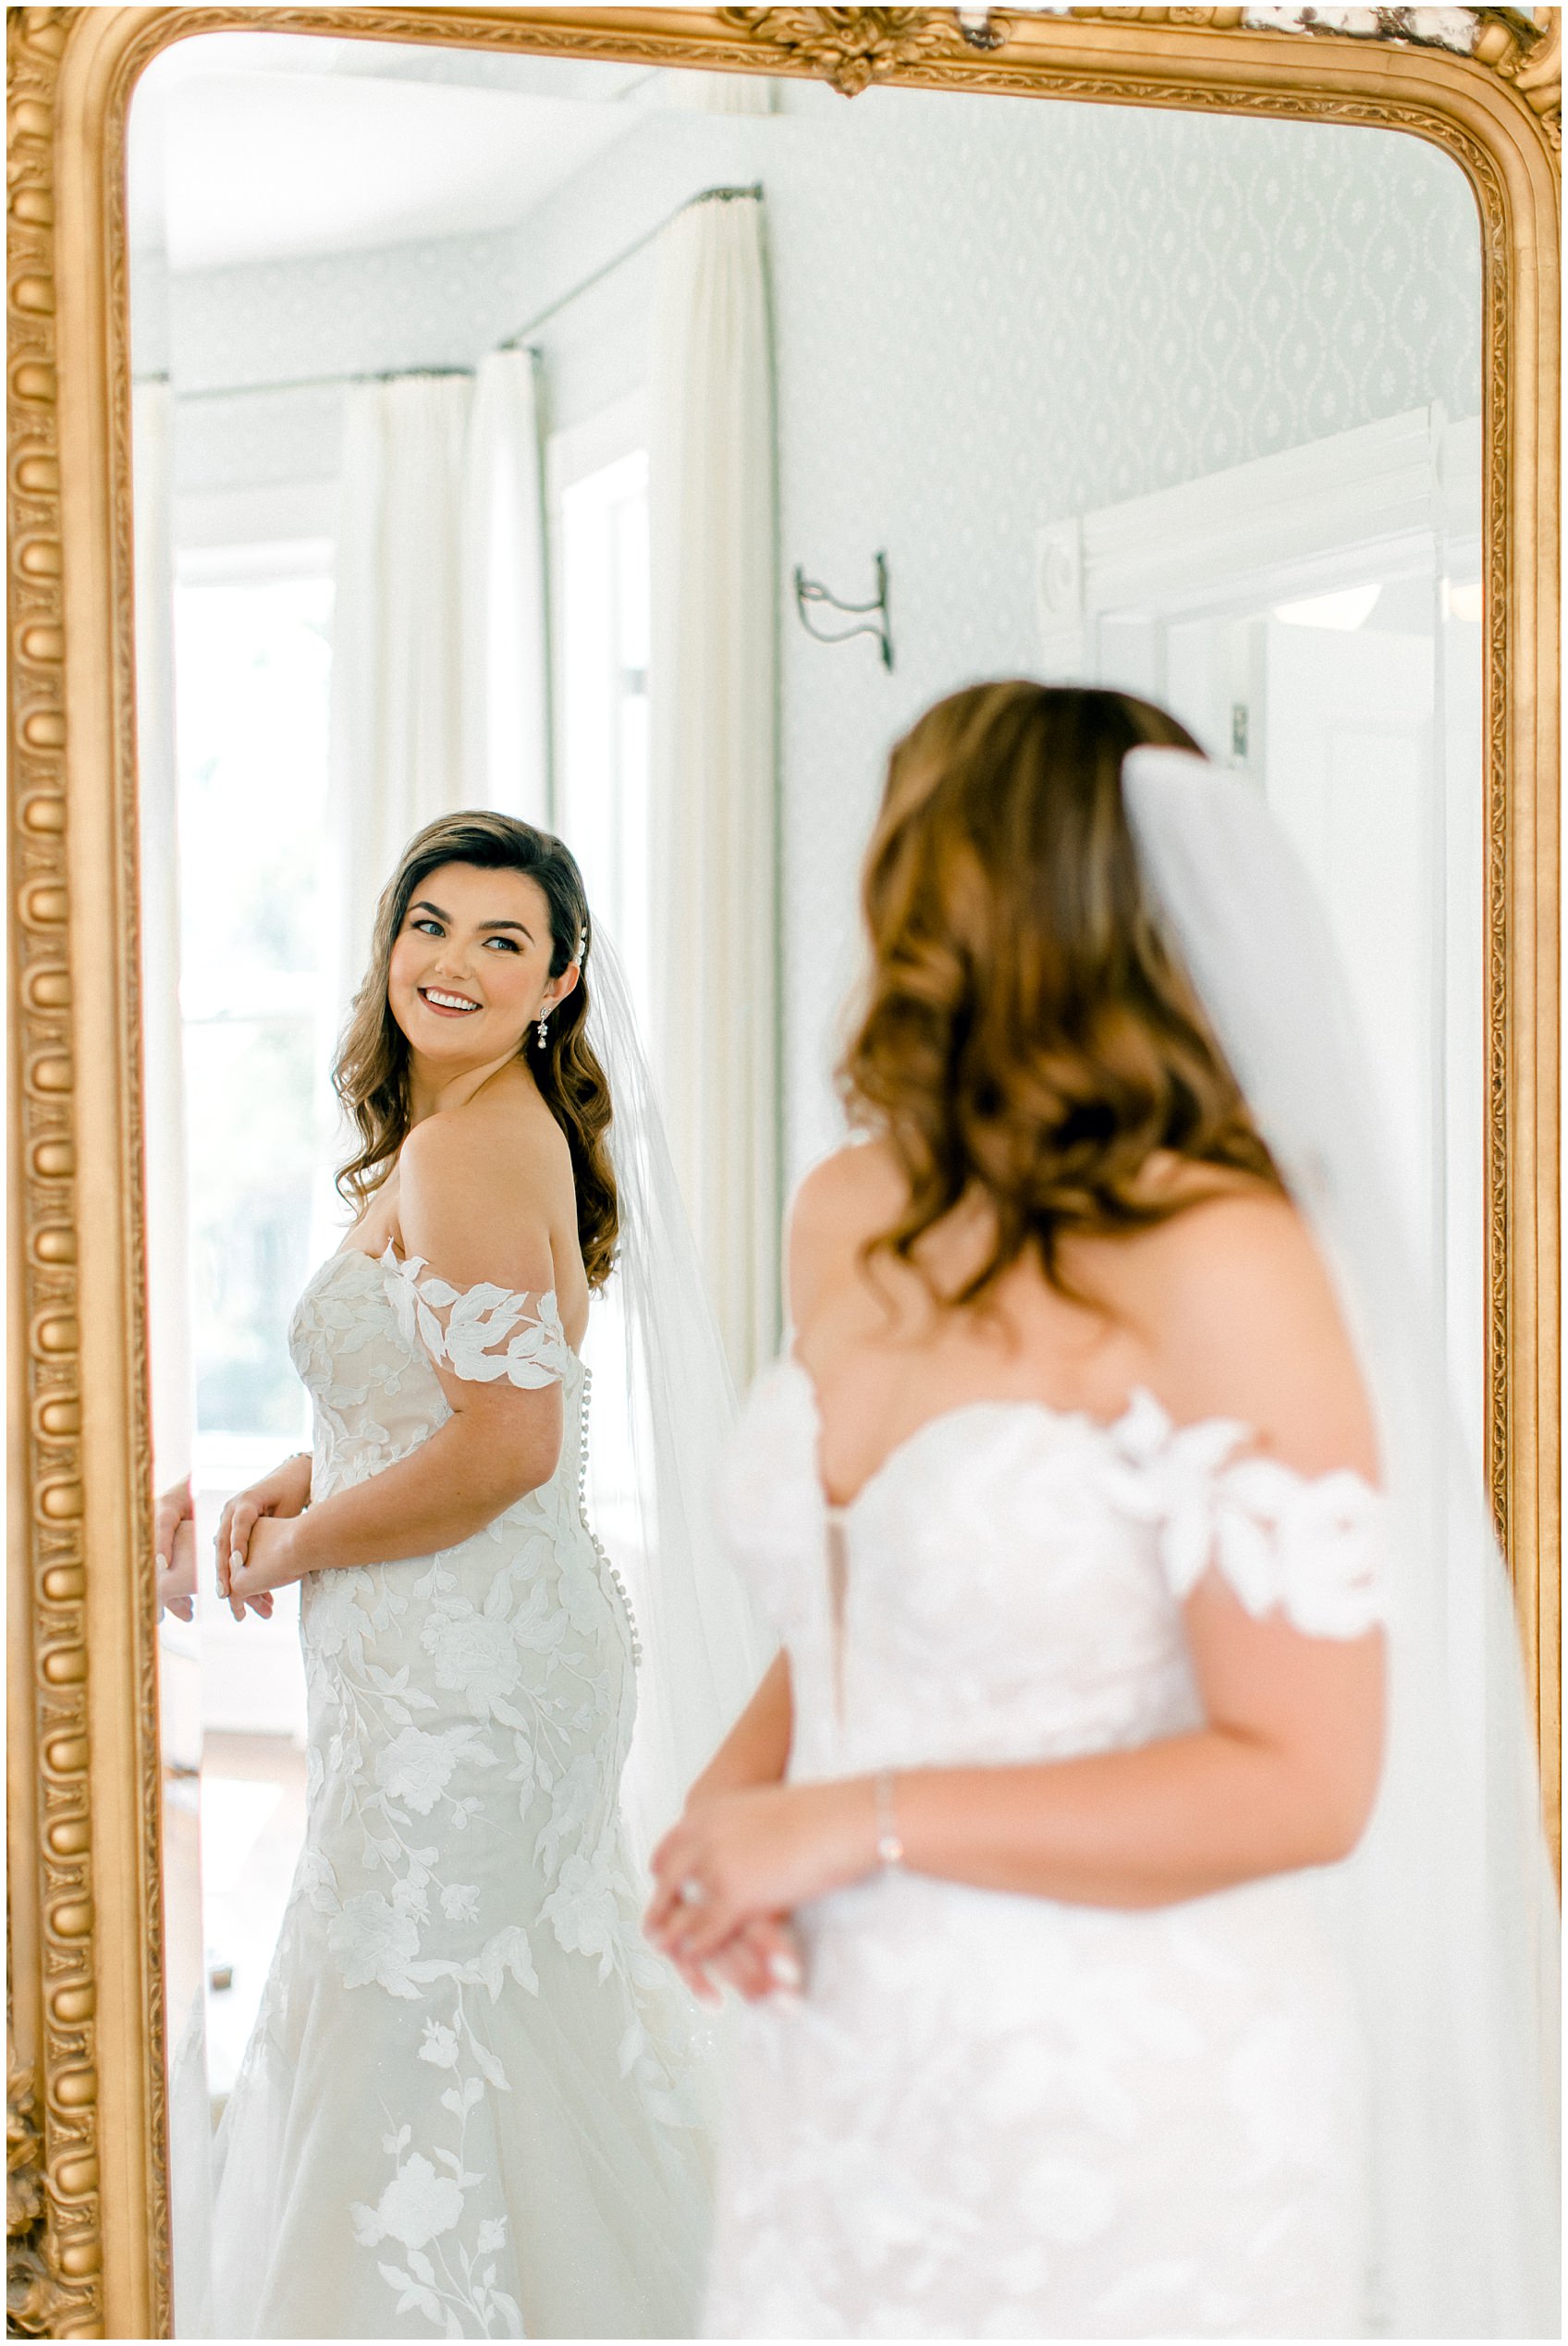 Woodbine Mansion Spring Bridal wedding Photos by Allison Jeffers Photography 0010